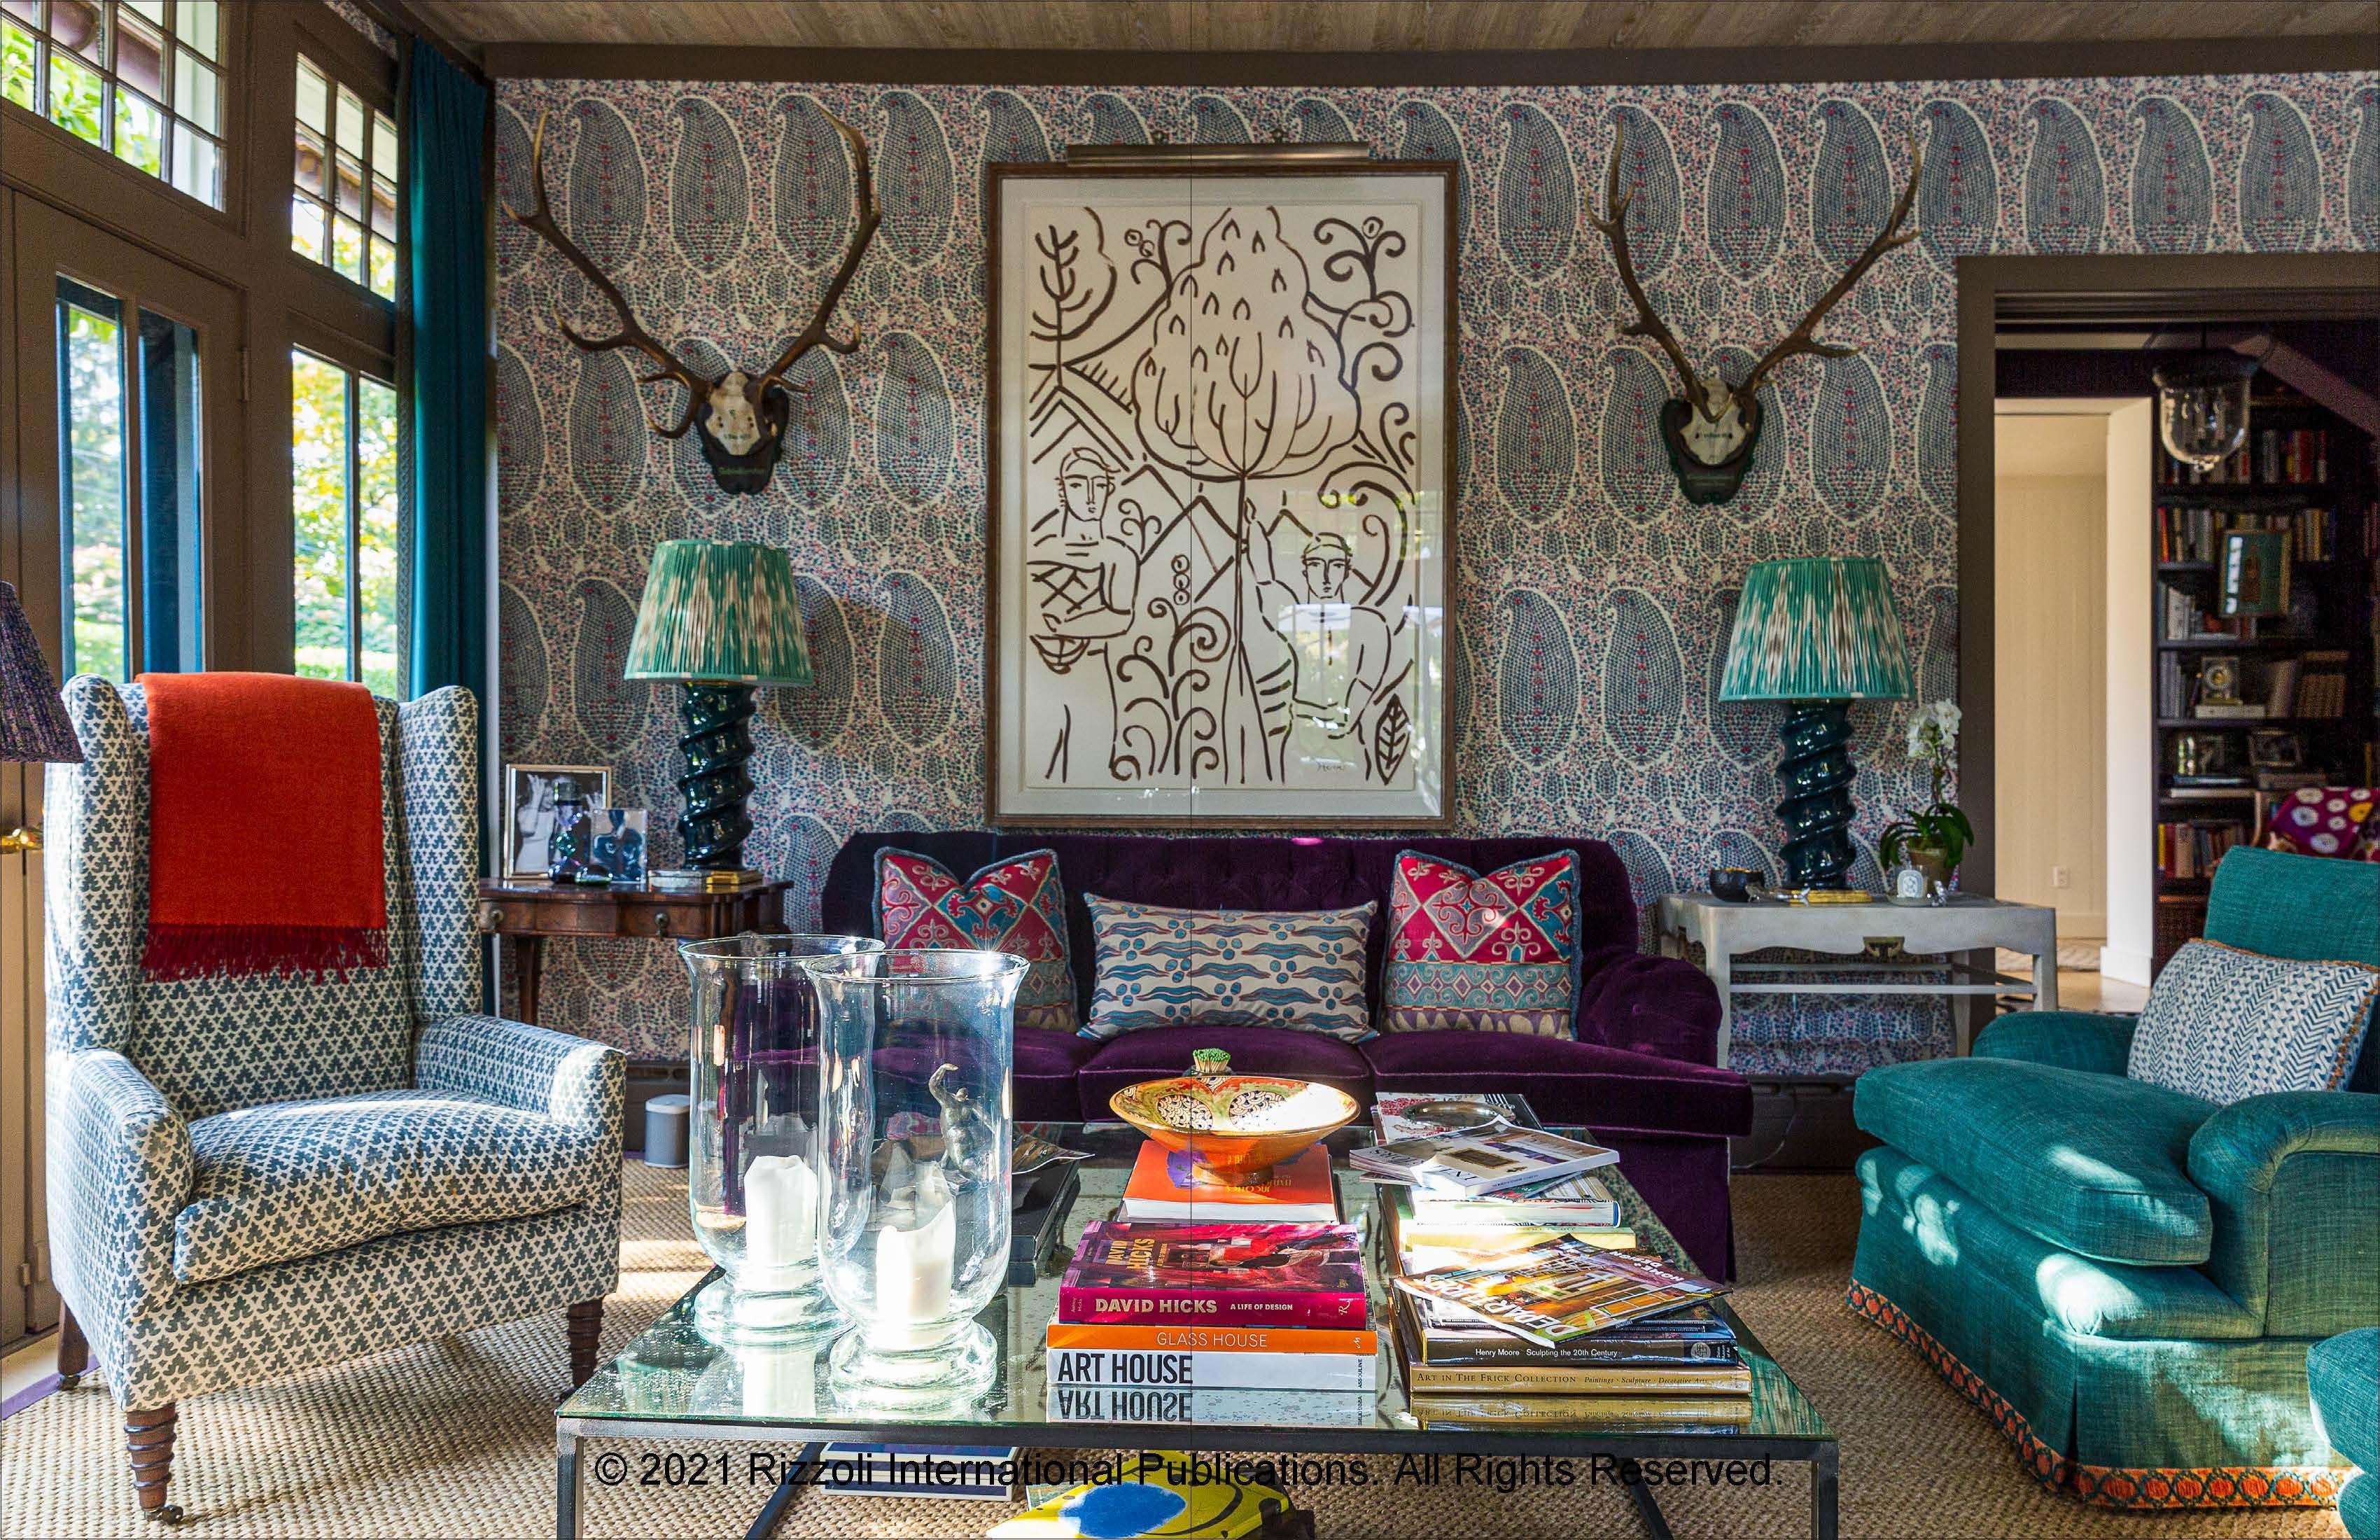 Author Susanna Salk, Photographs by Stacey Bewkes
Susanna Salk shares with us the delightful and inspiring homes of top designers and tastemakers, revealing the personal and idiosyncratic interiors they create for themselves. Brimming with